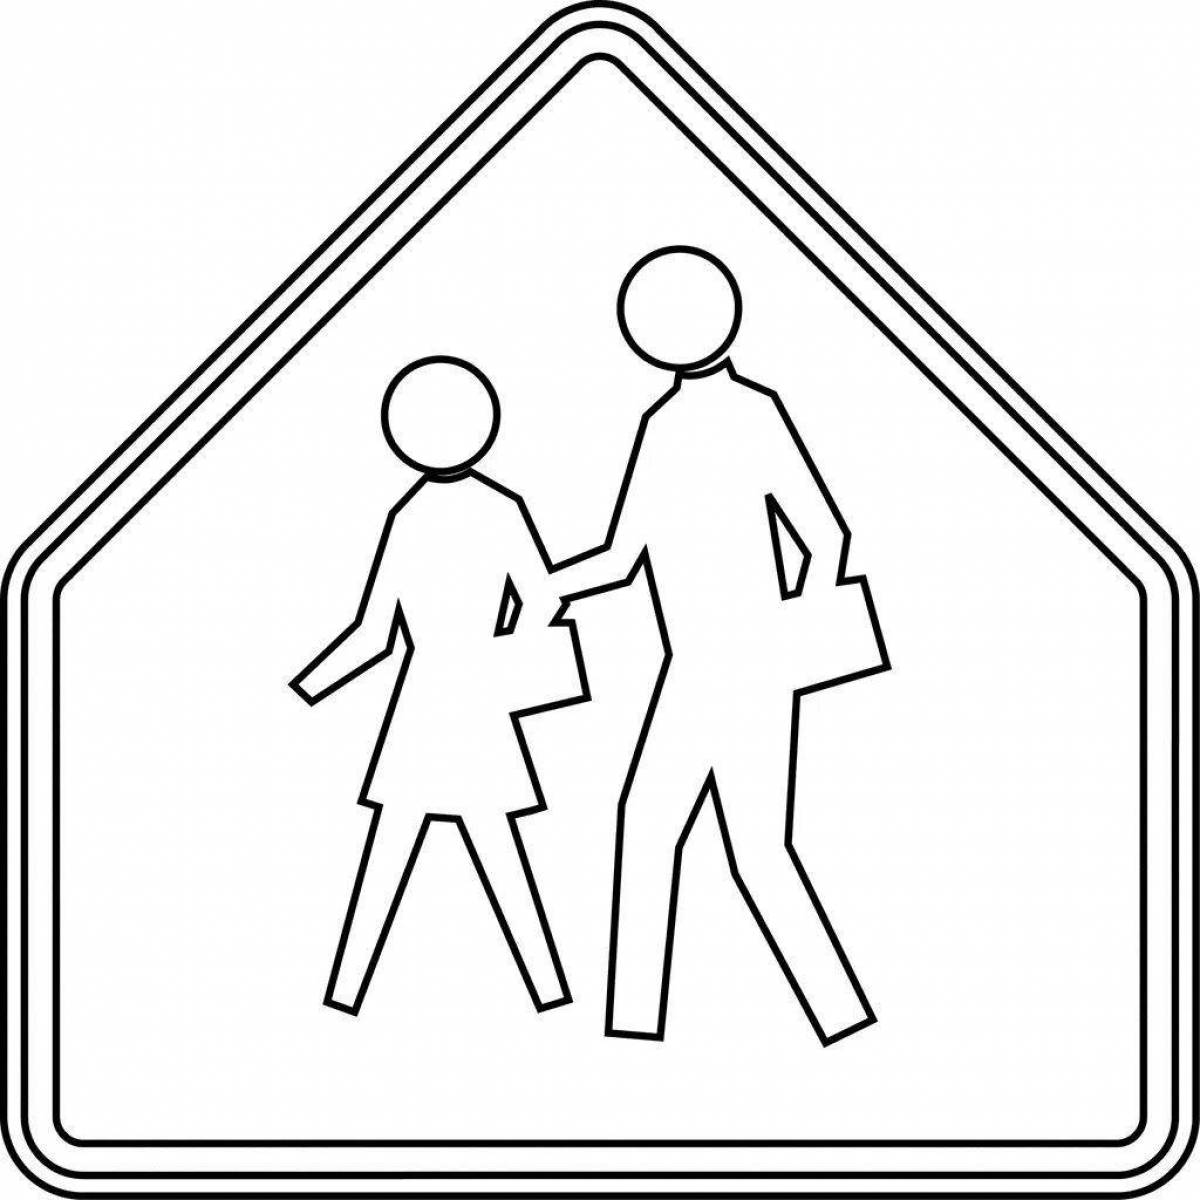 Funny residential area sign coloring page